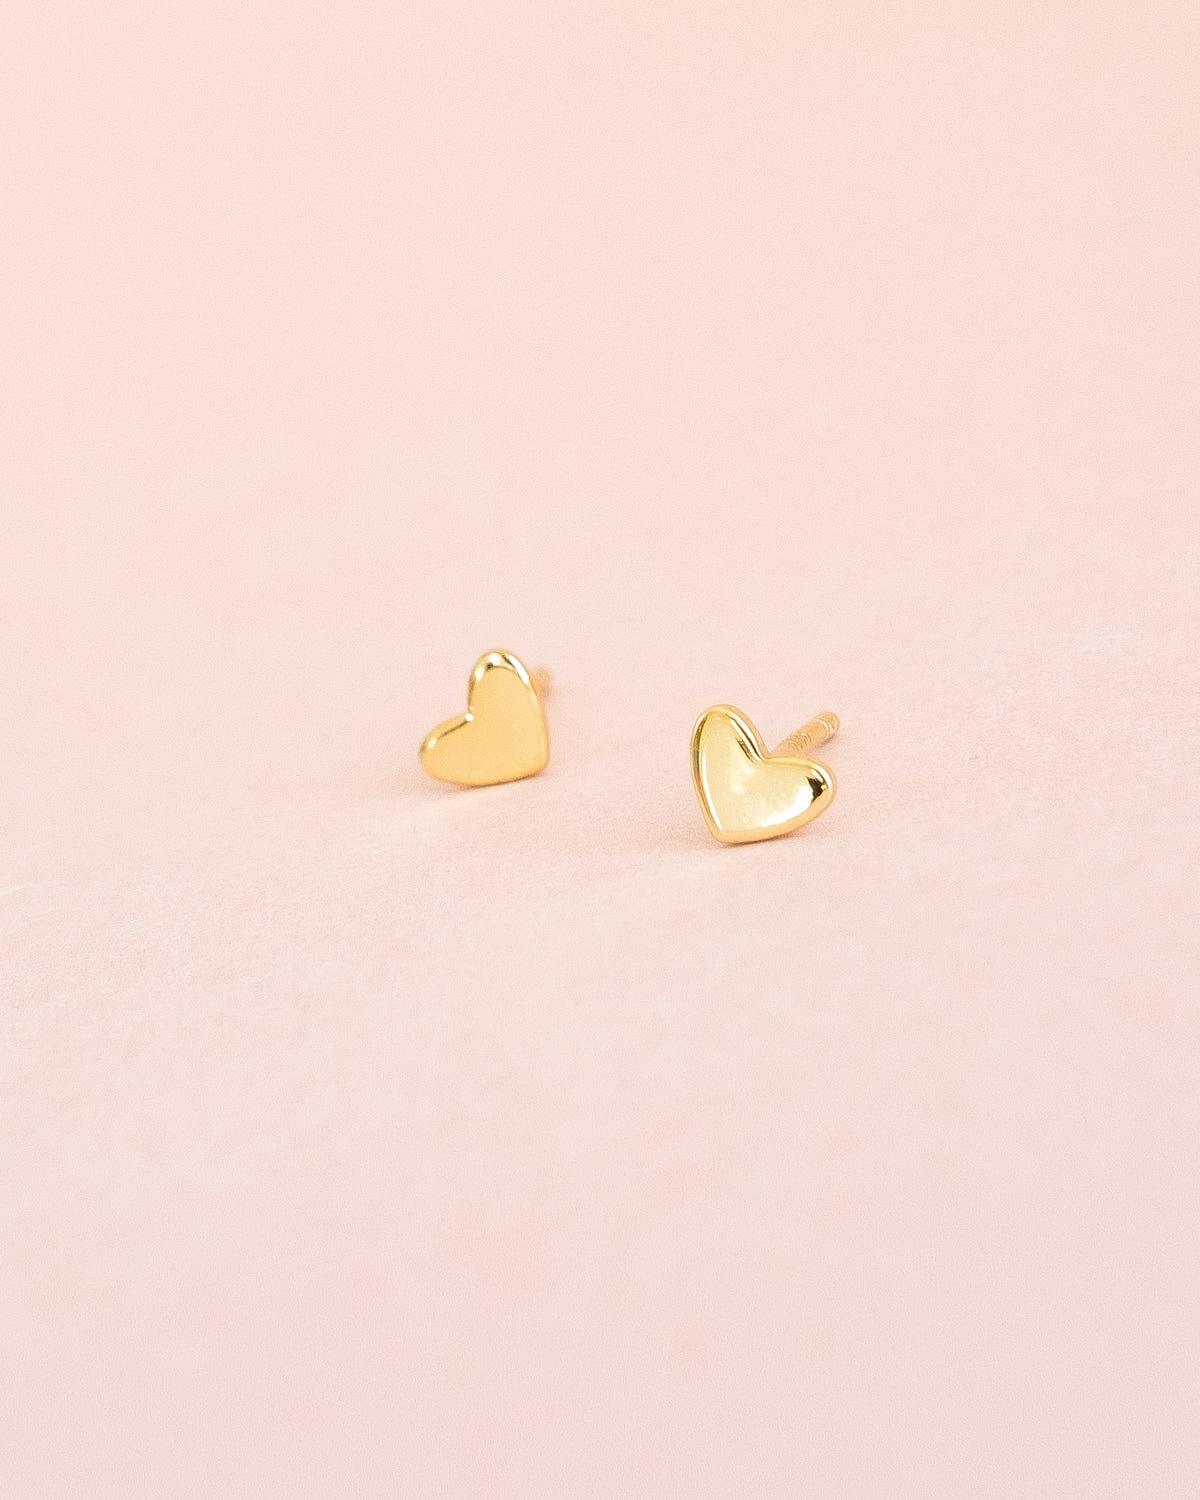 Buy Sterling Silver, 3 Sets of Silver Studs, Mini Heart Earrings, Tiny  Heart Studs, Valentines Gift, Sterling Heart Studs, Minimalist Studs Online  in India - Etsy